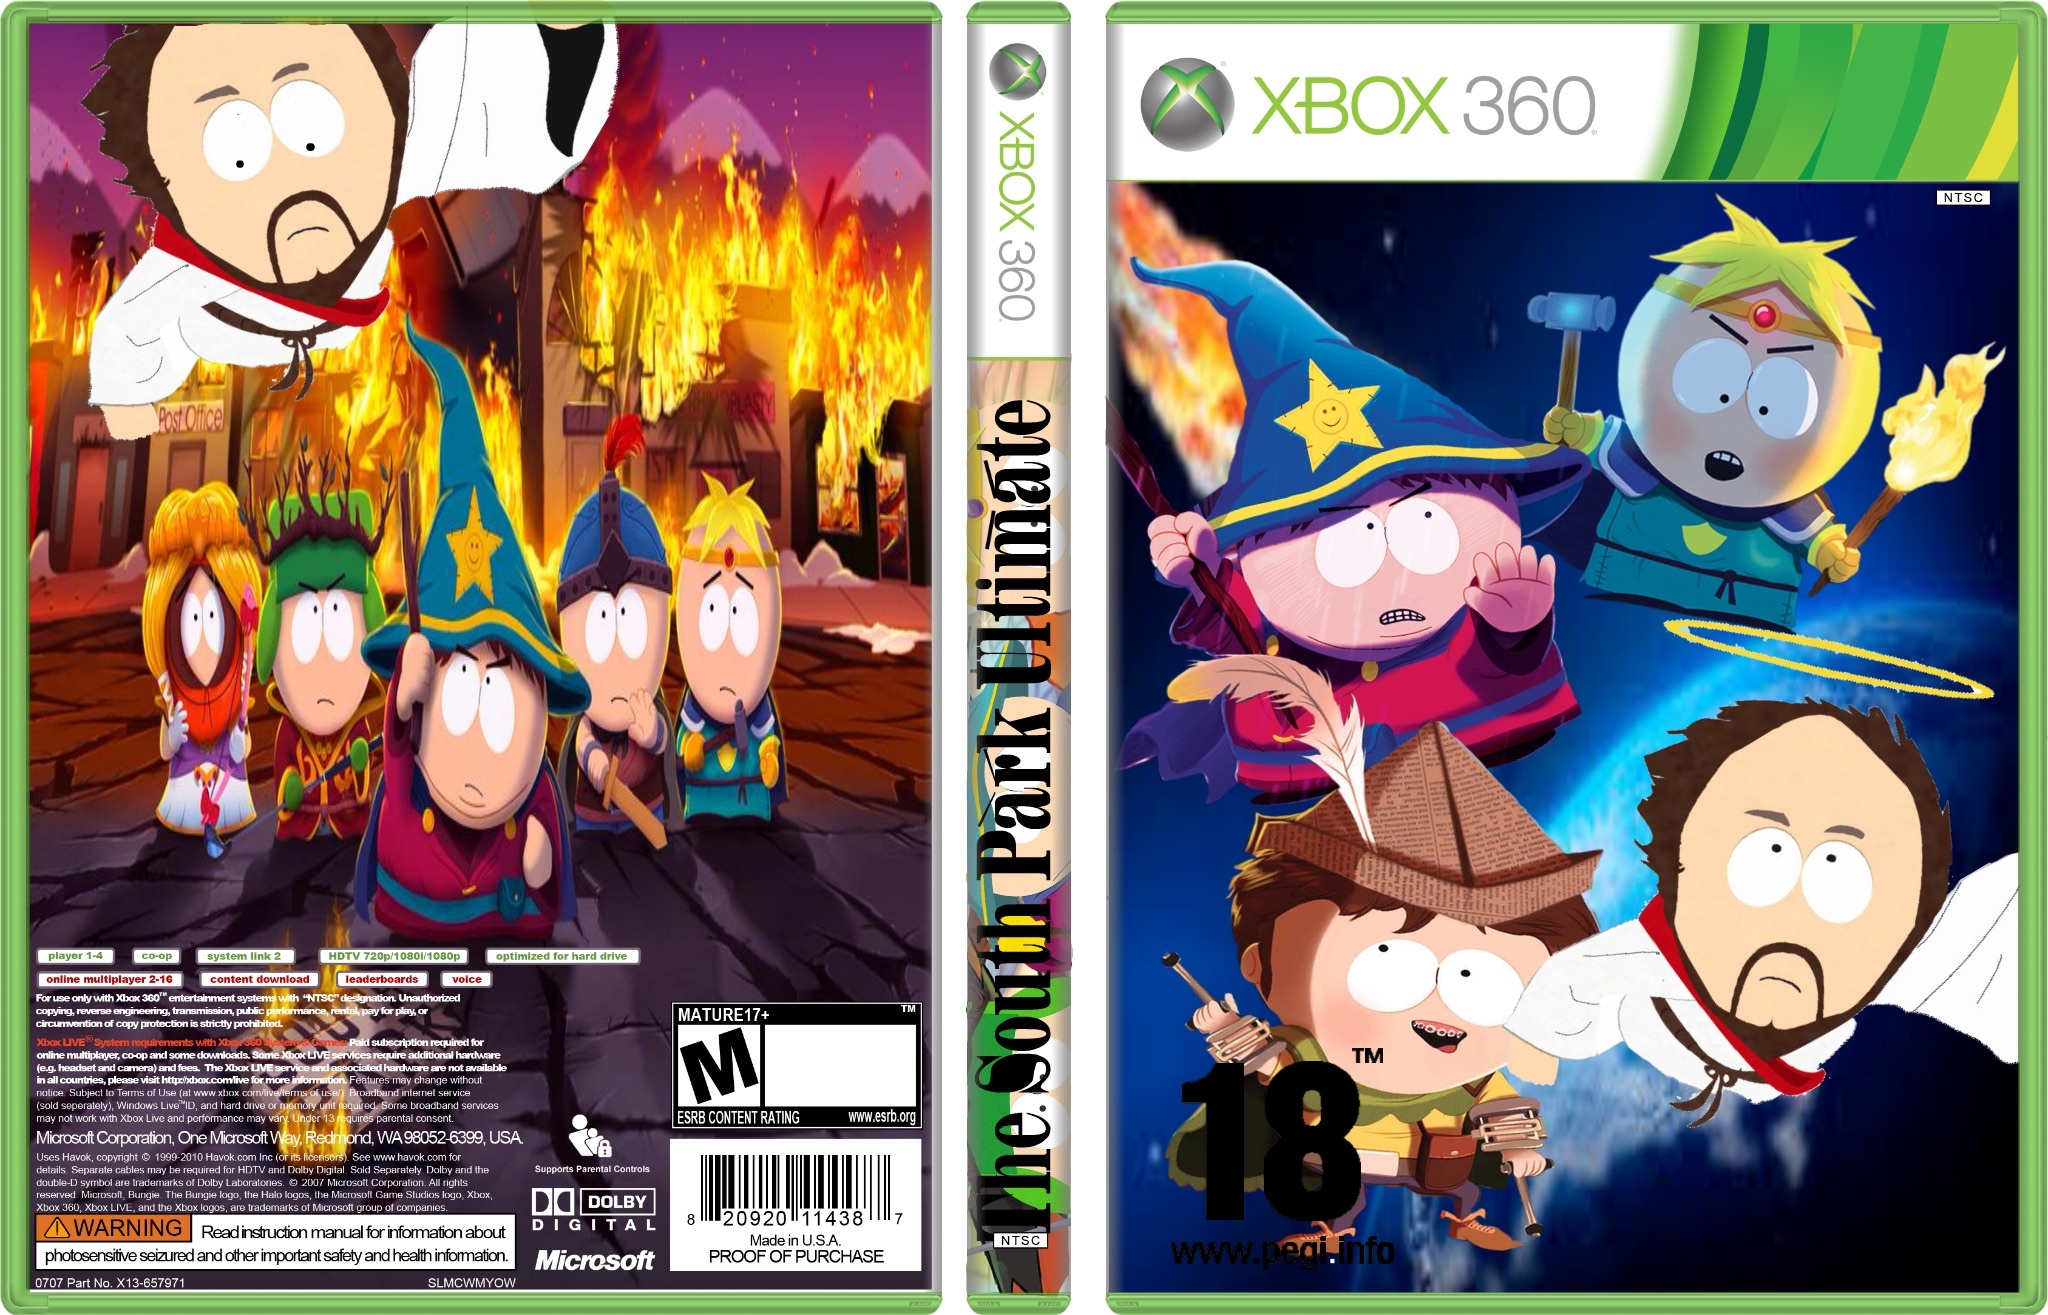 The south park ultimate box cover